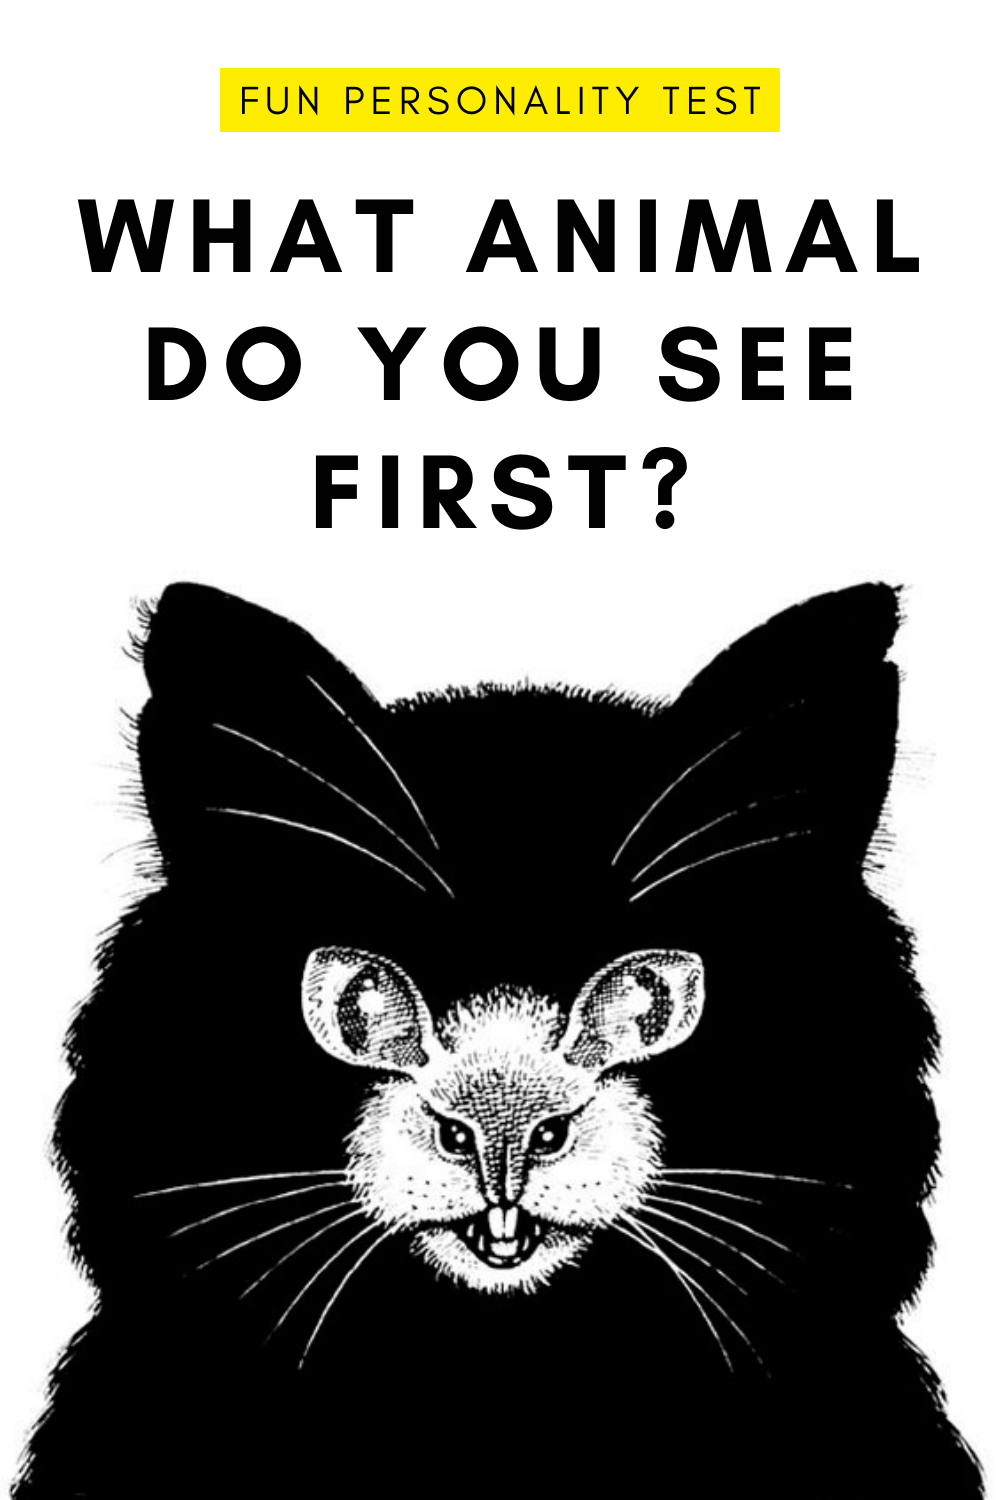 The Animal You See First In This Optical Illusion Reveals Your Dominant Traits